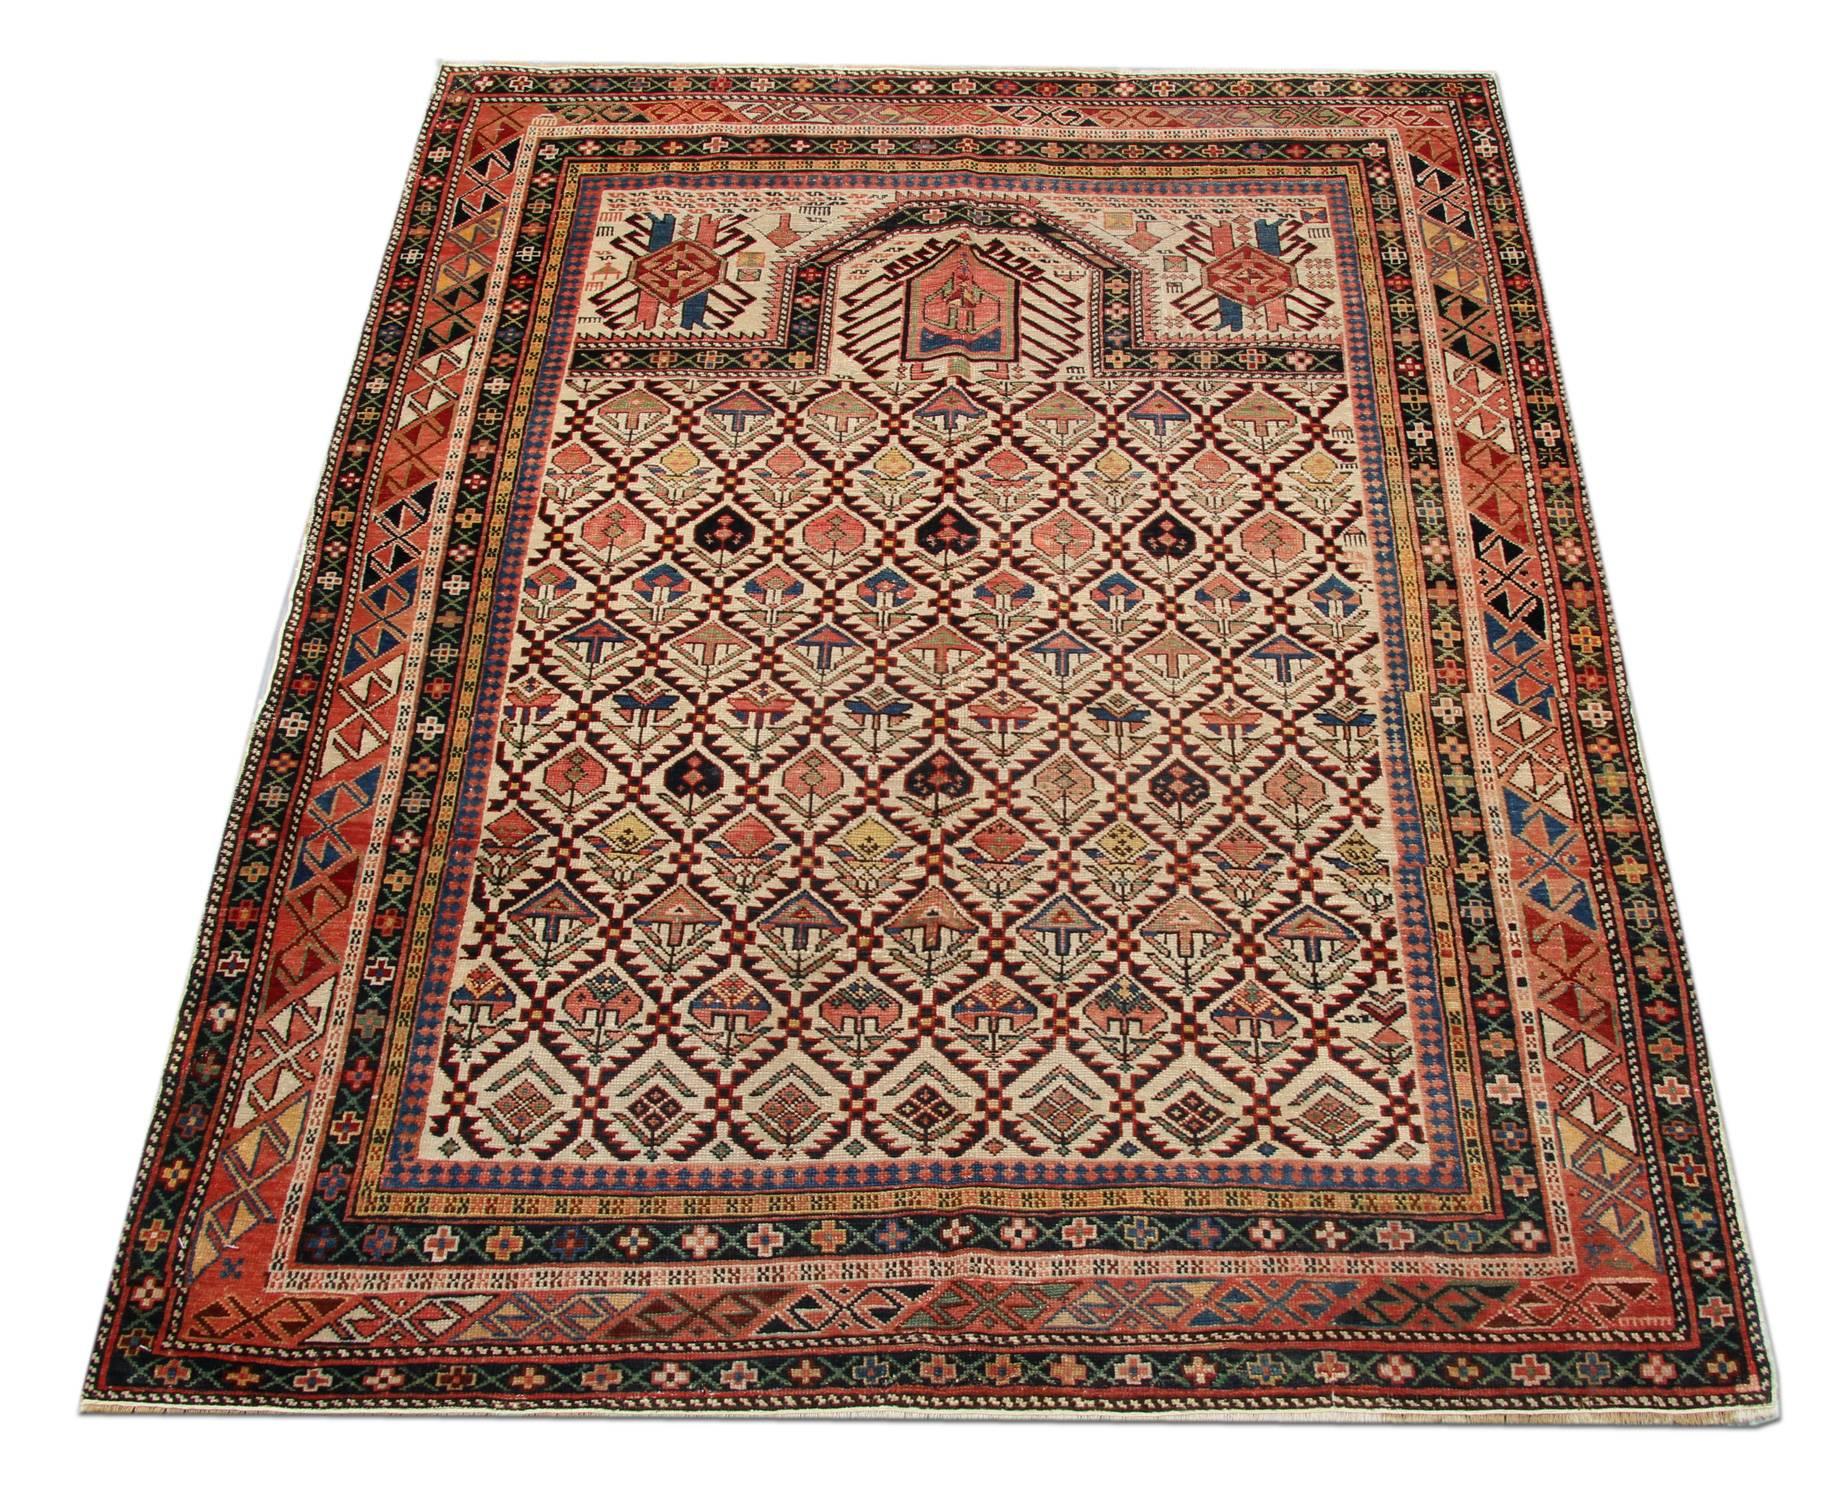 An excellent example of handmade carpet Caucasian carpet oriental rug weaving from the Shirvan region. Though these ivory ground prayer patterned rugs may seem like from a distance, this woven rug has a great range of colours. This geometric rug has